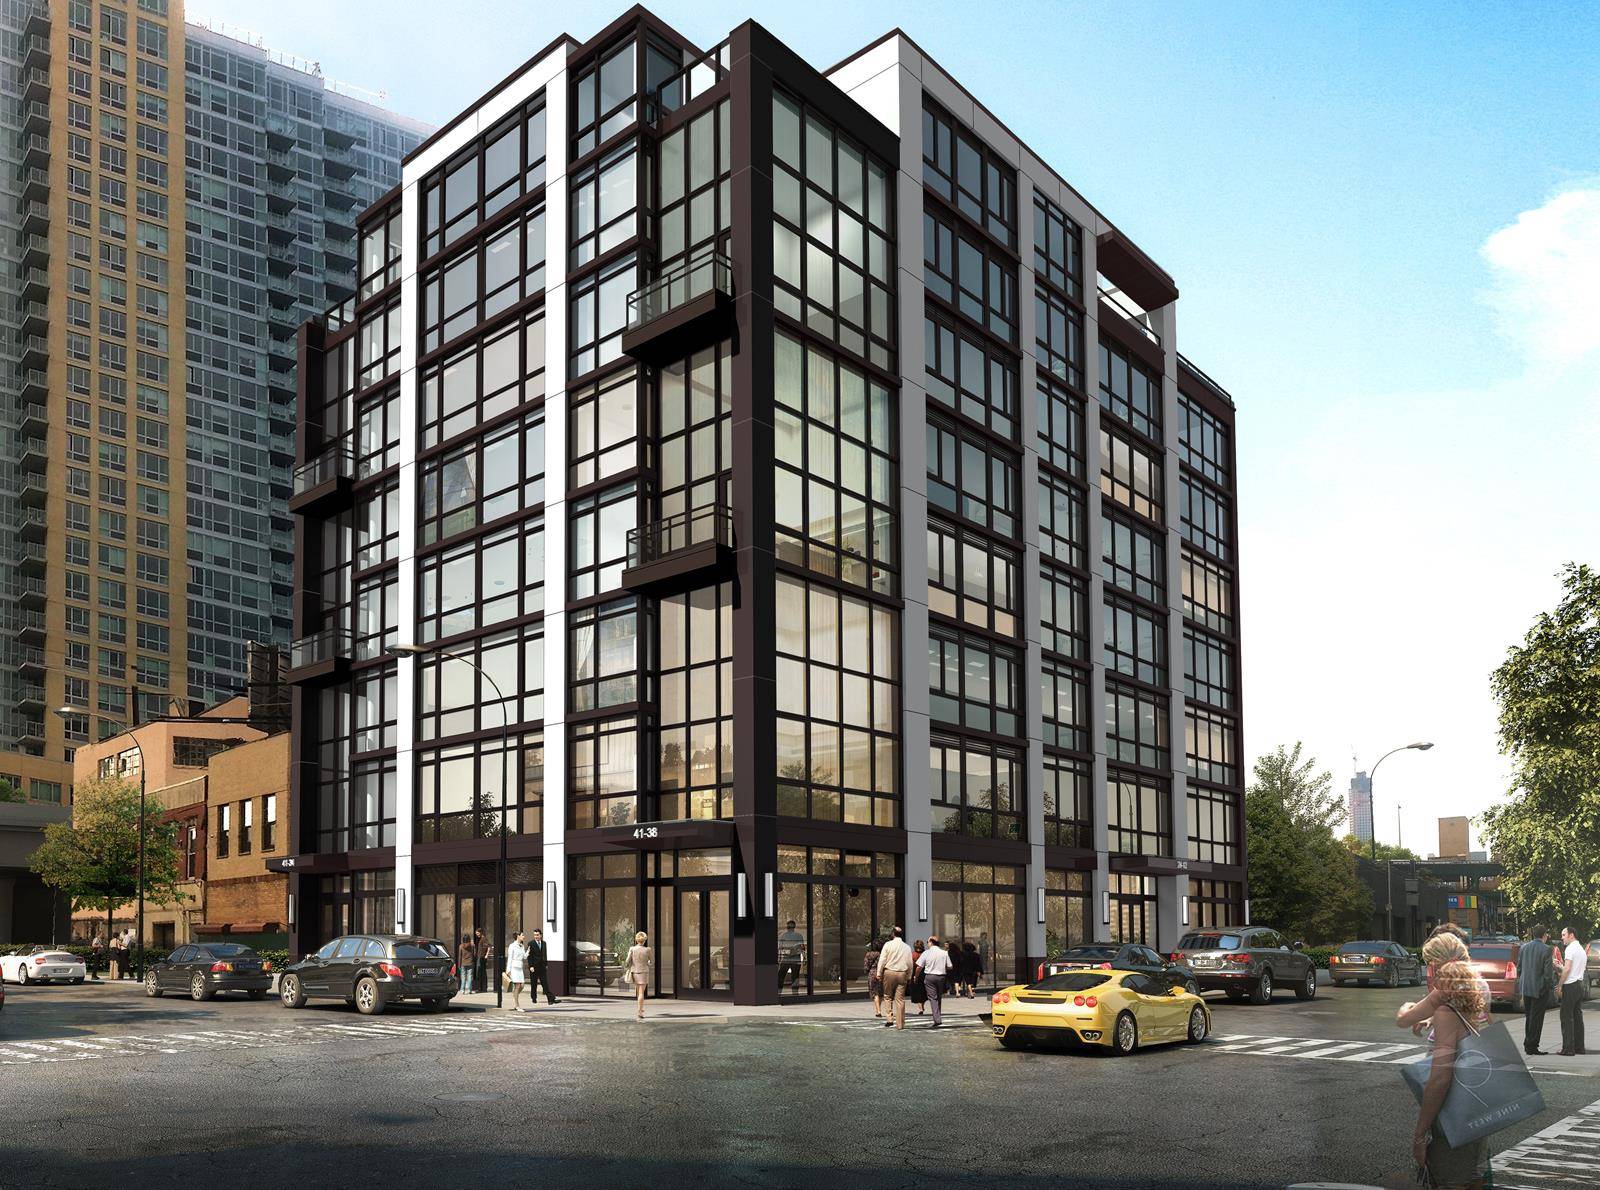 All new luxury development in the heart of Long Island City.